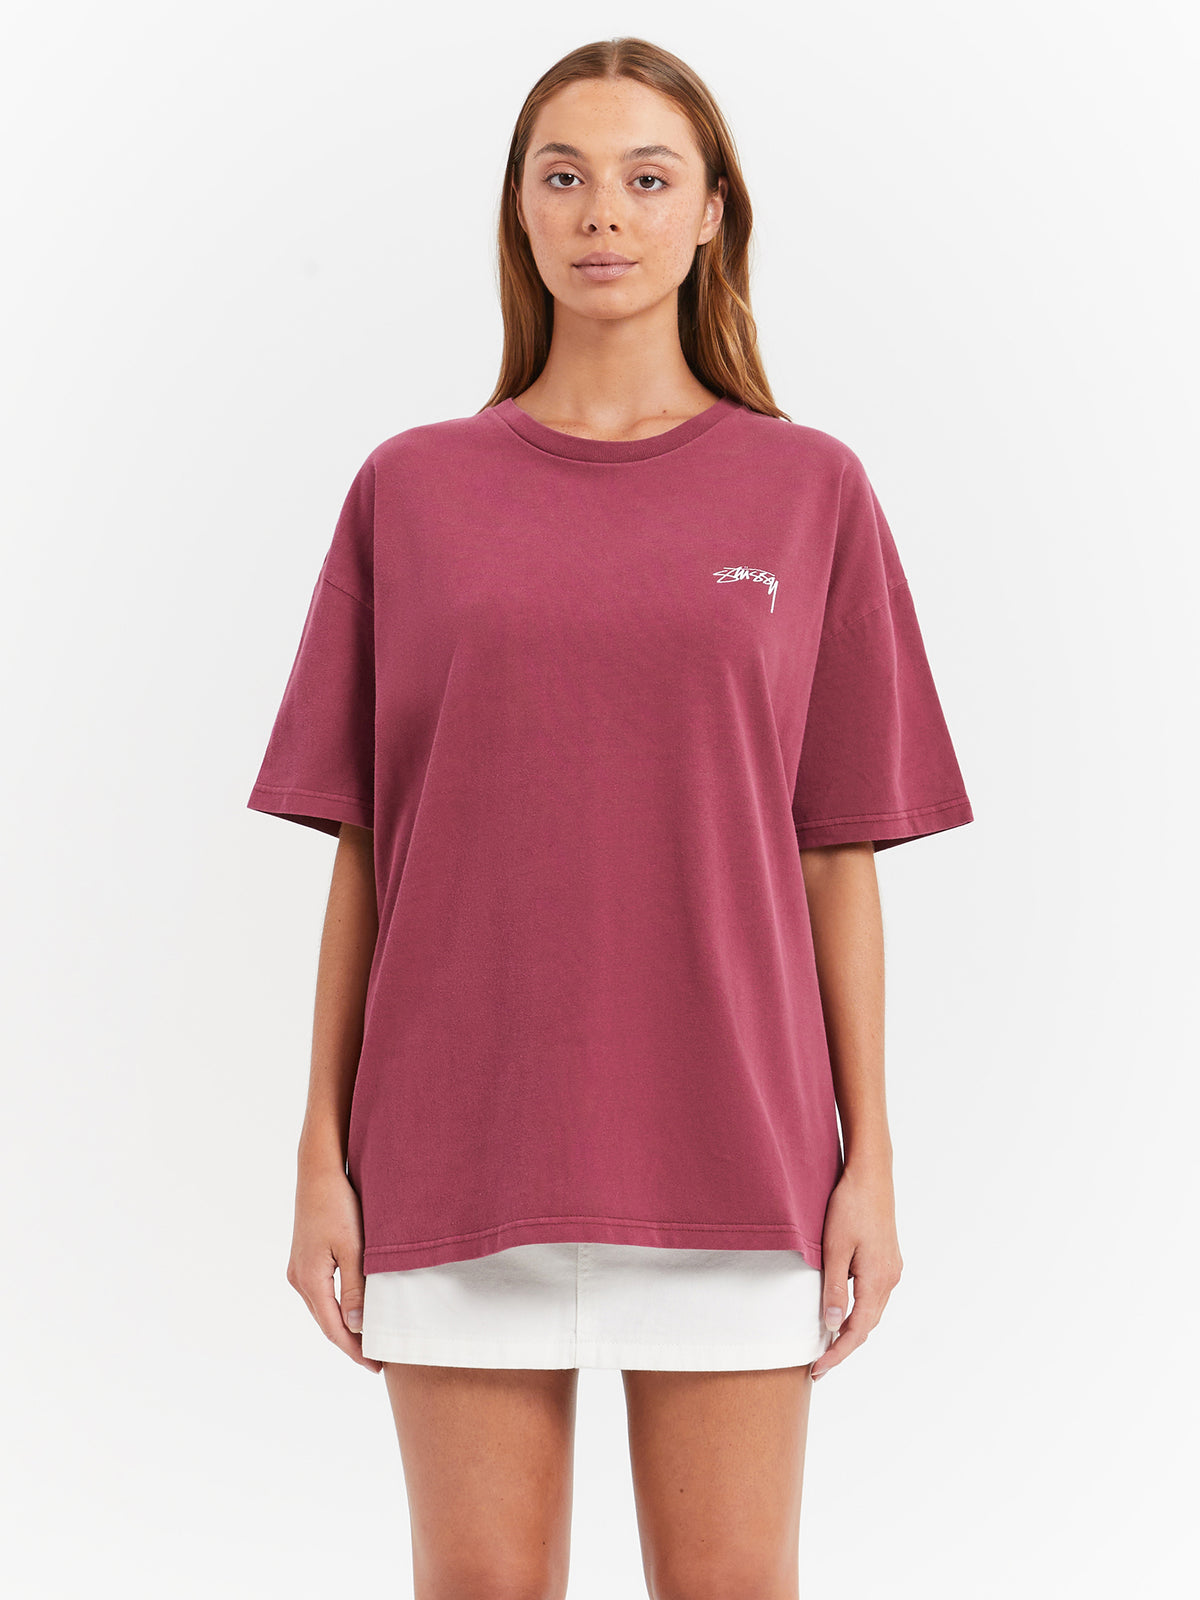 Statue Heavyweight Relaxed T-Shirt in Raspberry